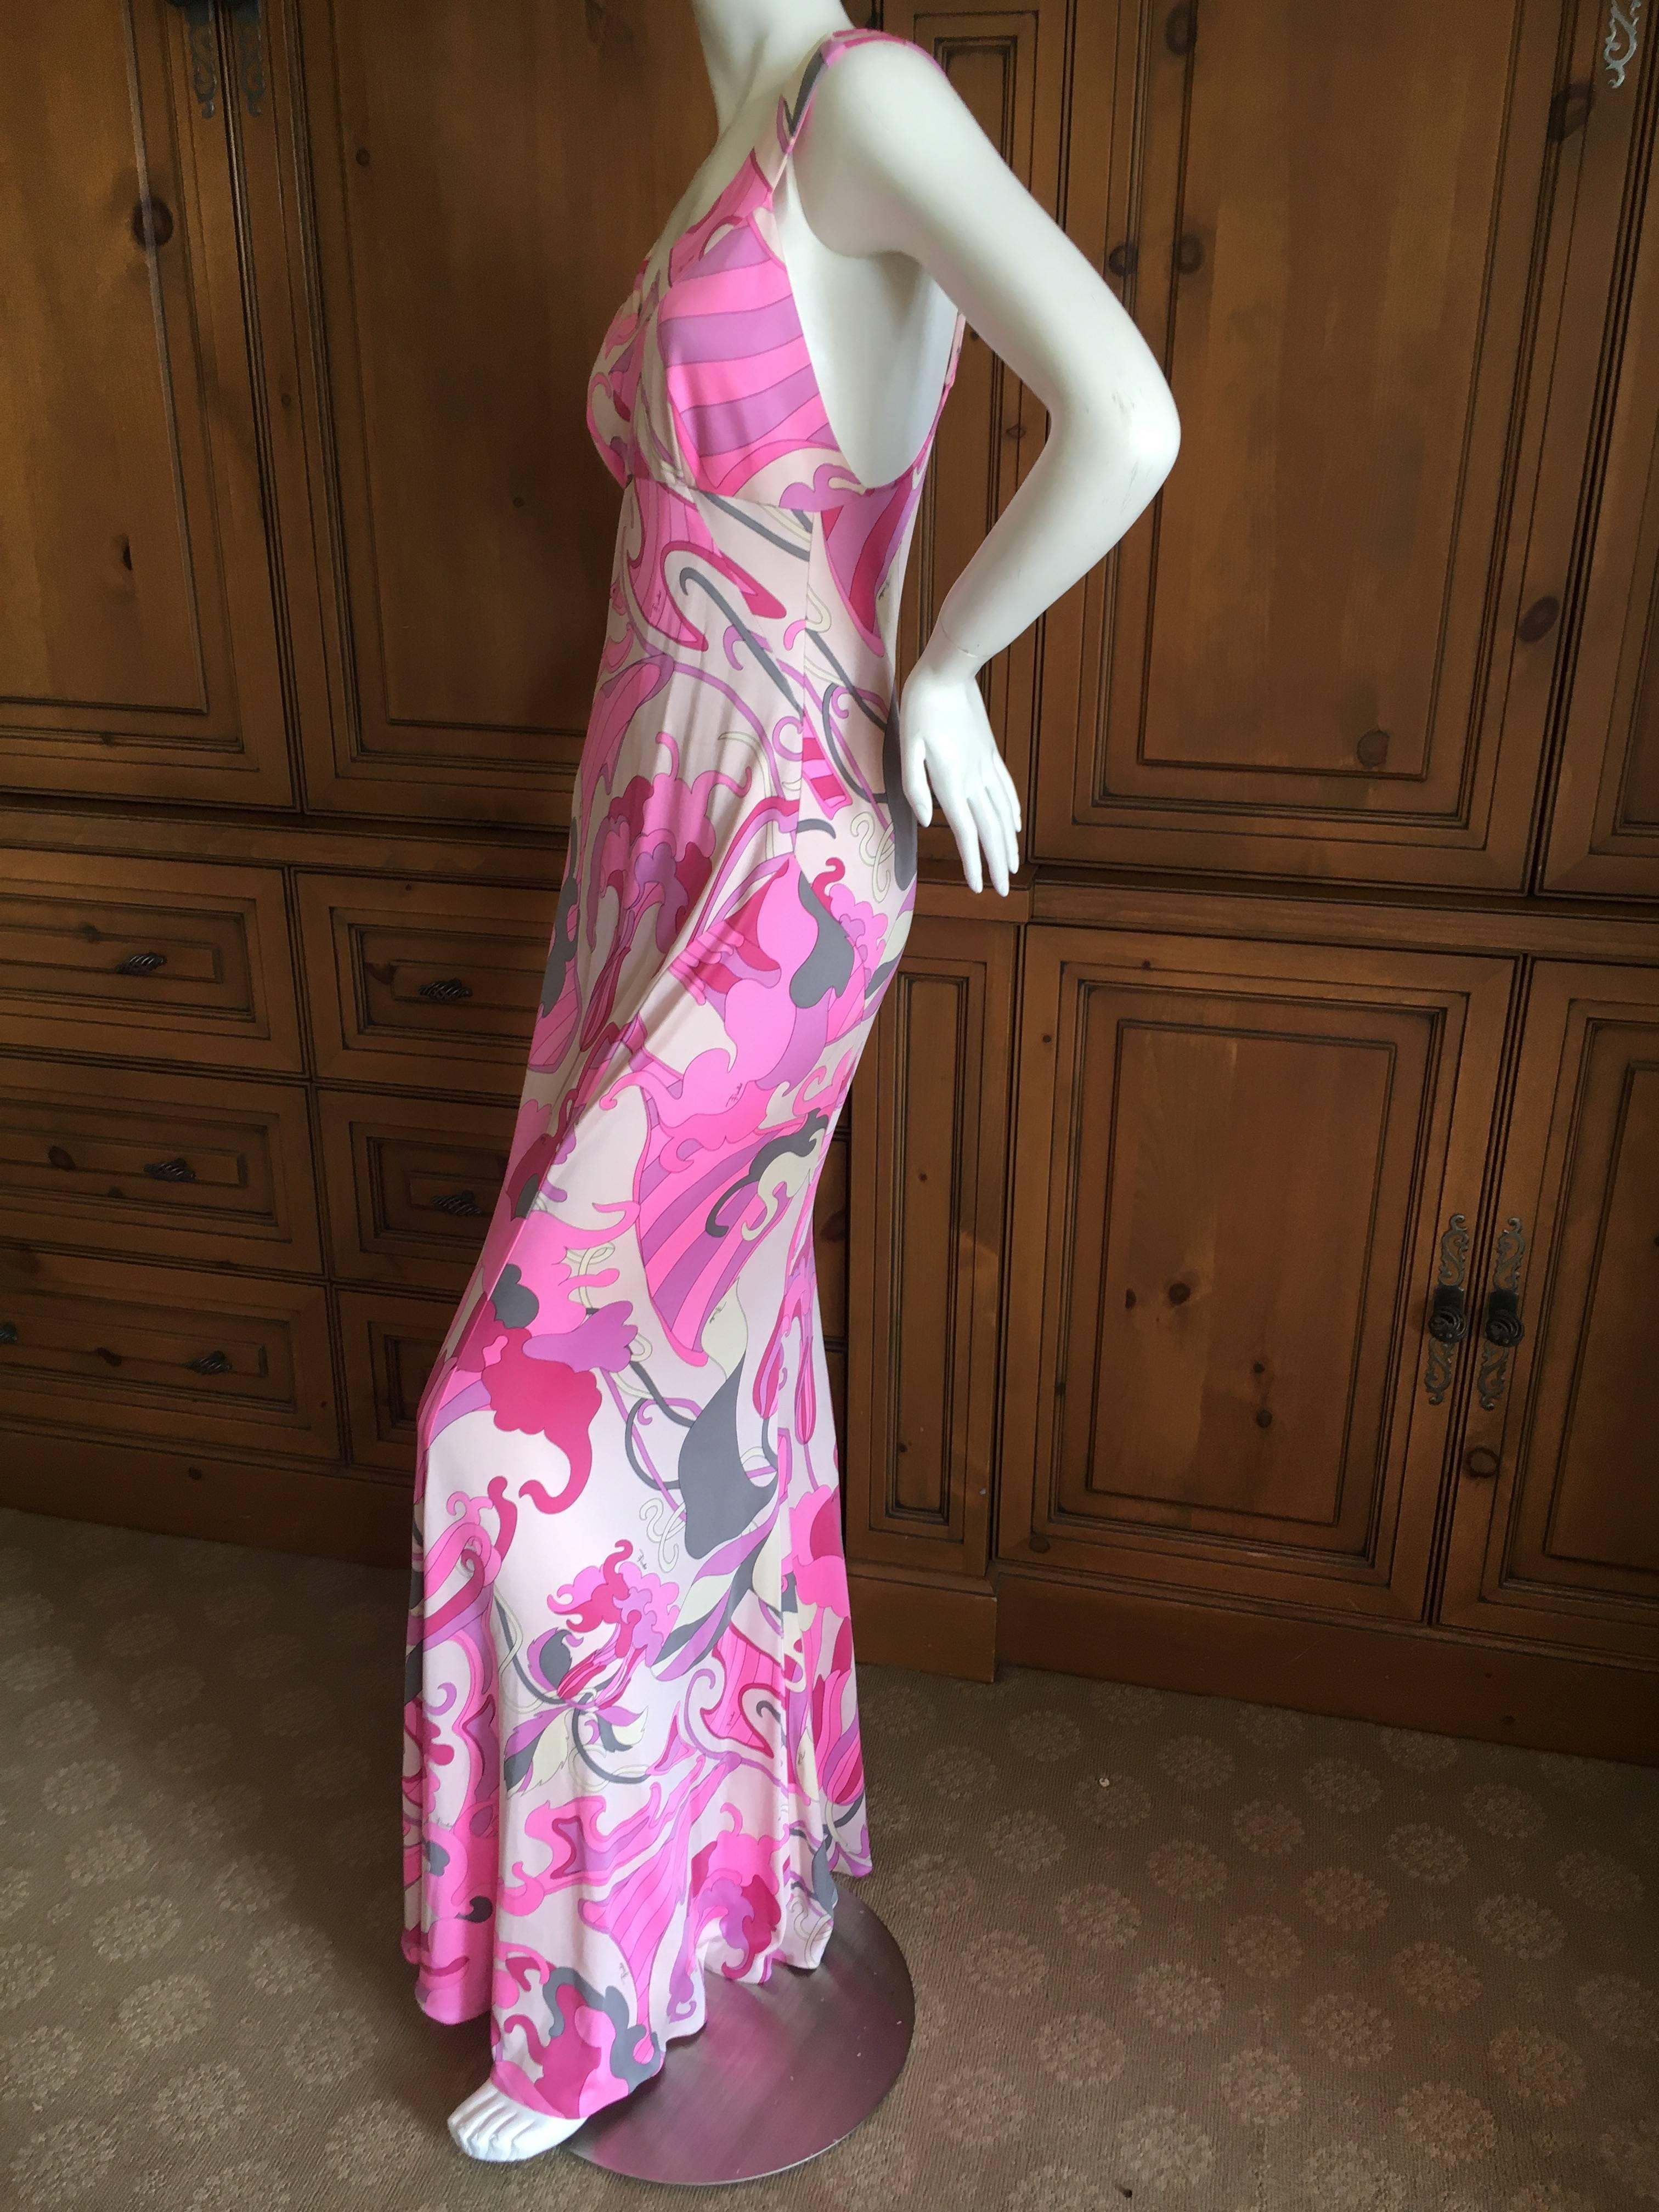 Emilio Pucci Pink Maxi Dress New with Tags 1